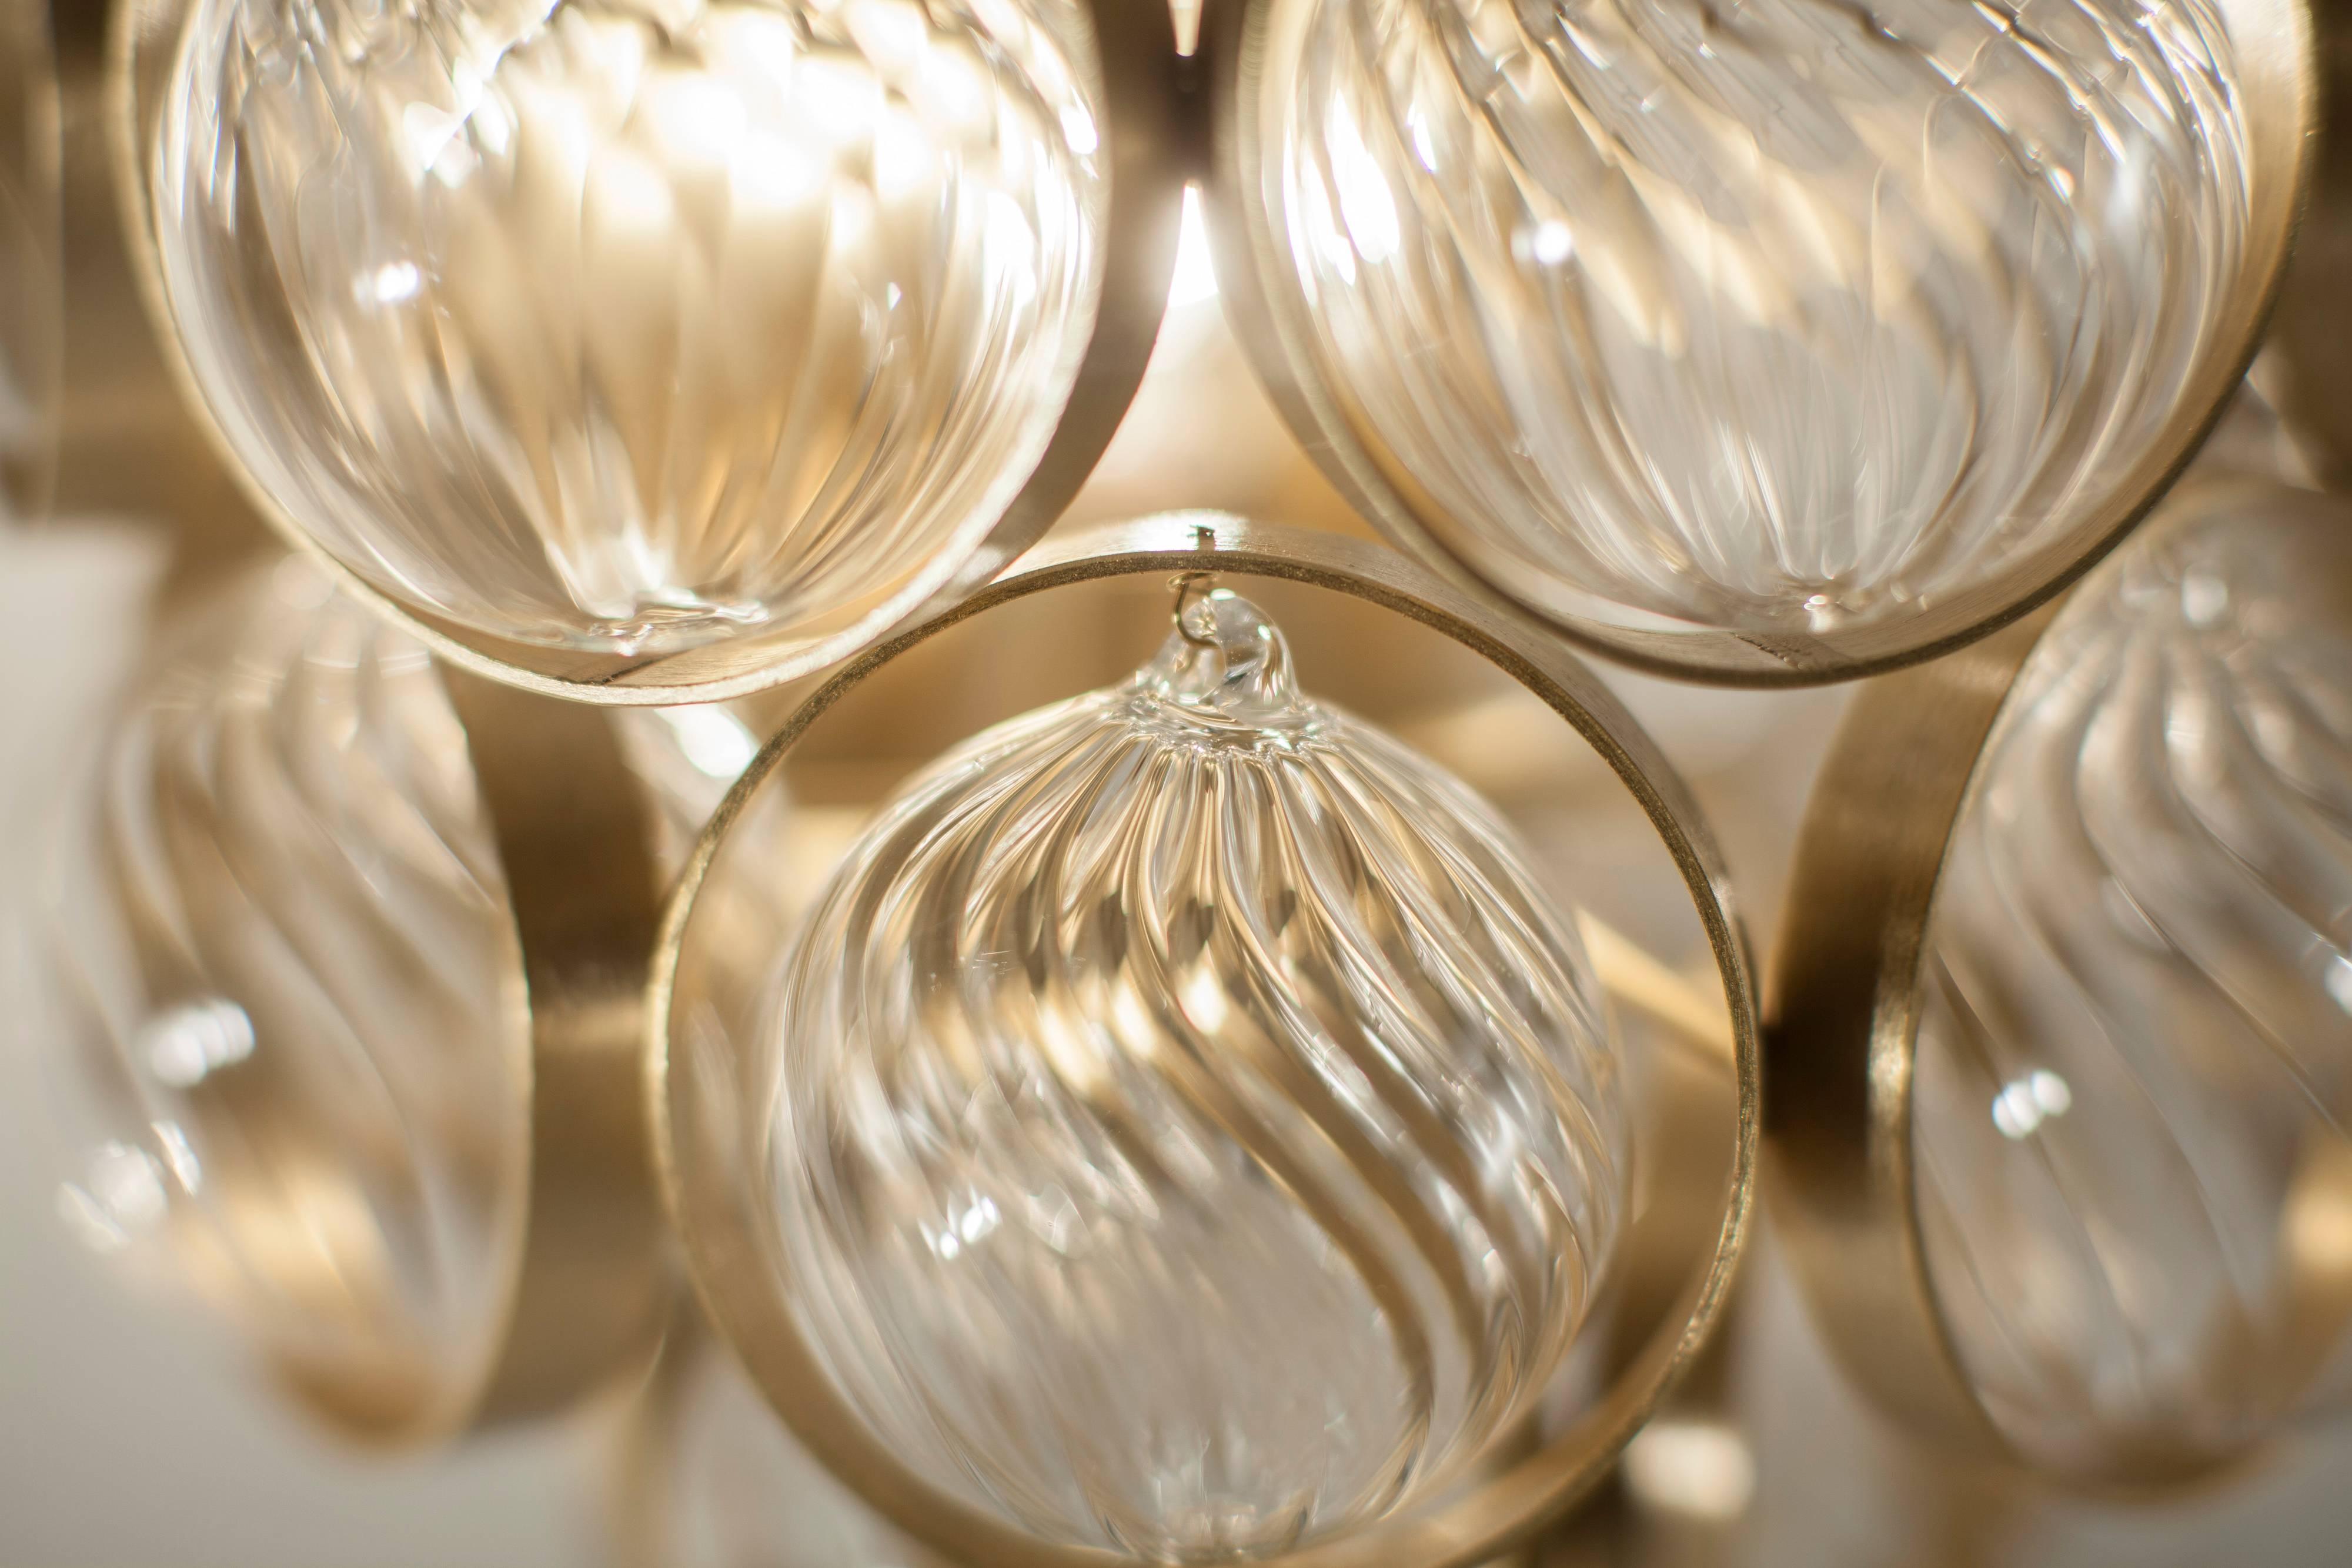 With satin gold metal and handblown clear glass spheres with spiral ribbing, the Atomos is symmetrically aligned but also has a rich vitality and brightness to it. Each textured glass ball within this lively cluster is held within a flat metal ring